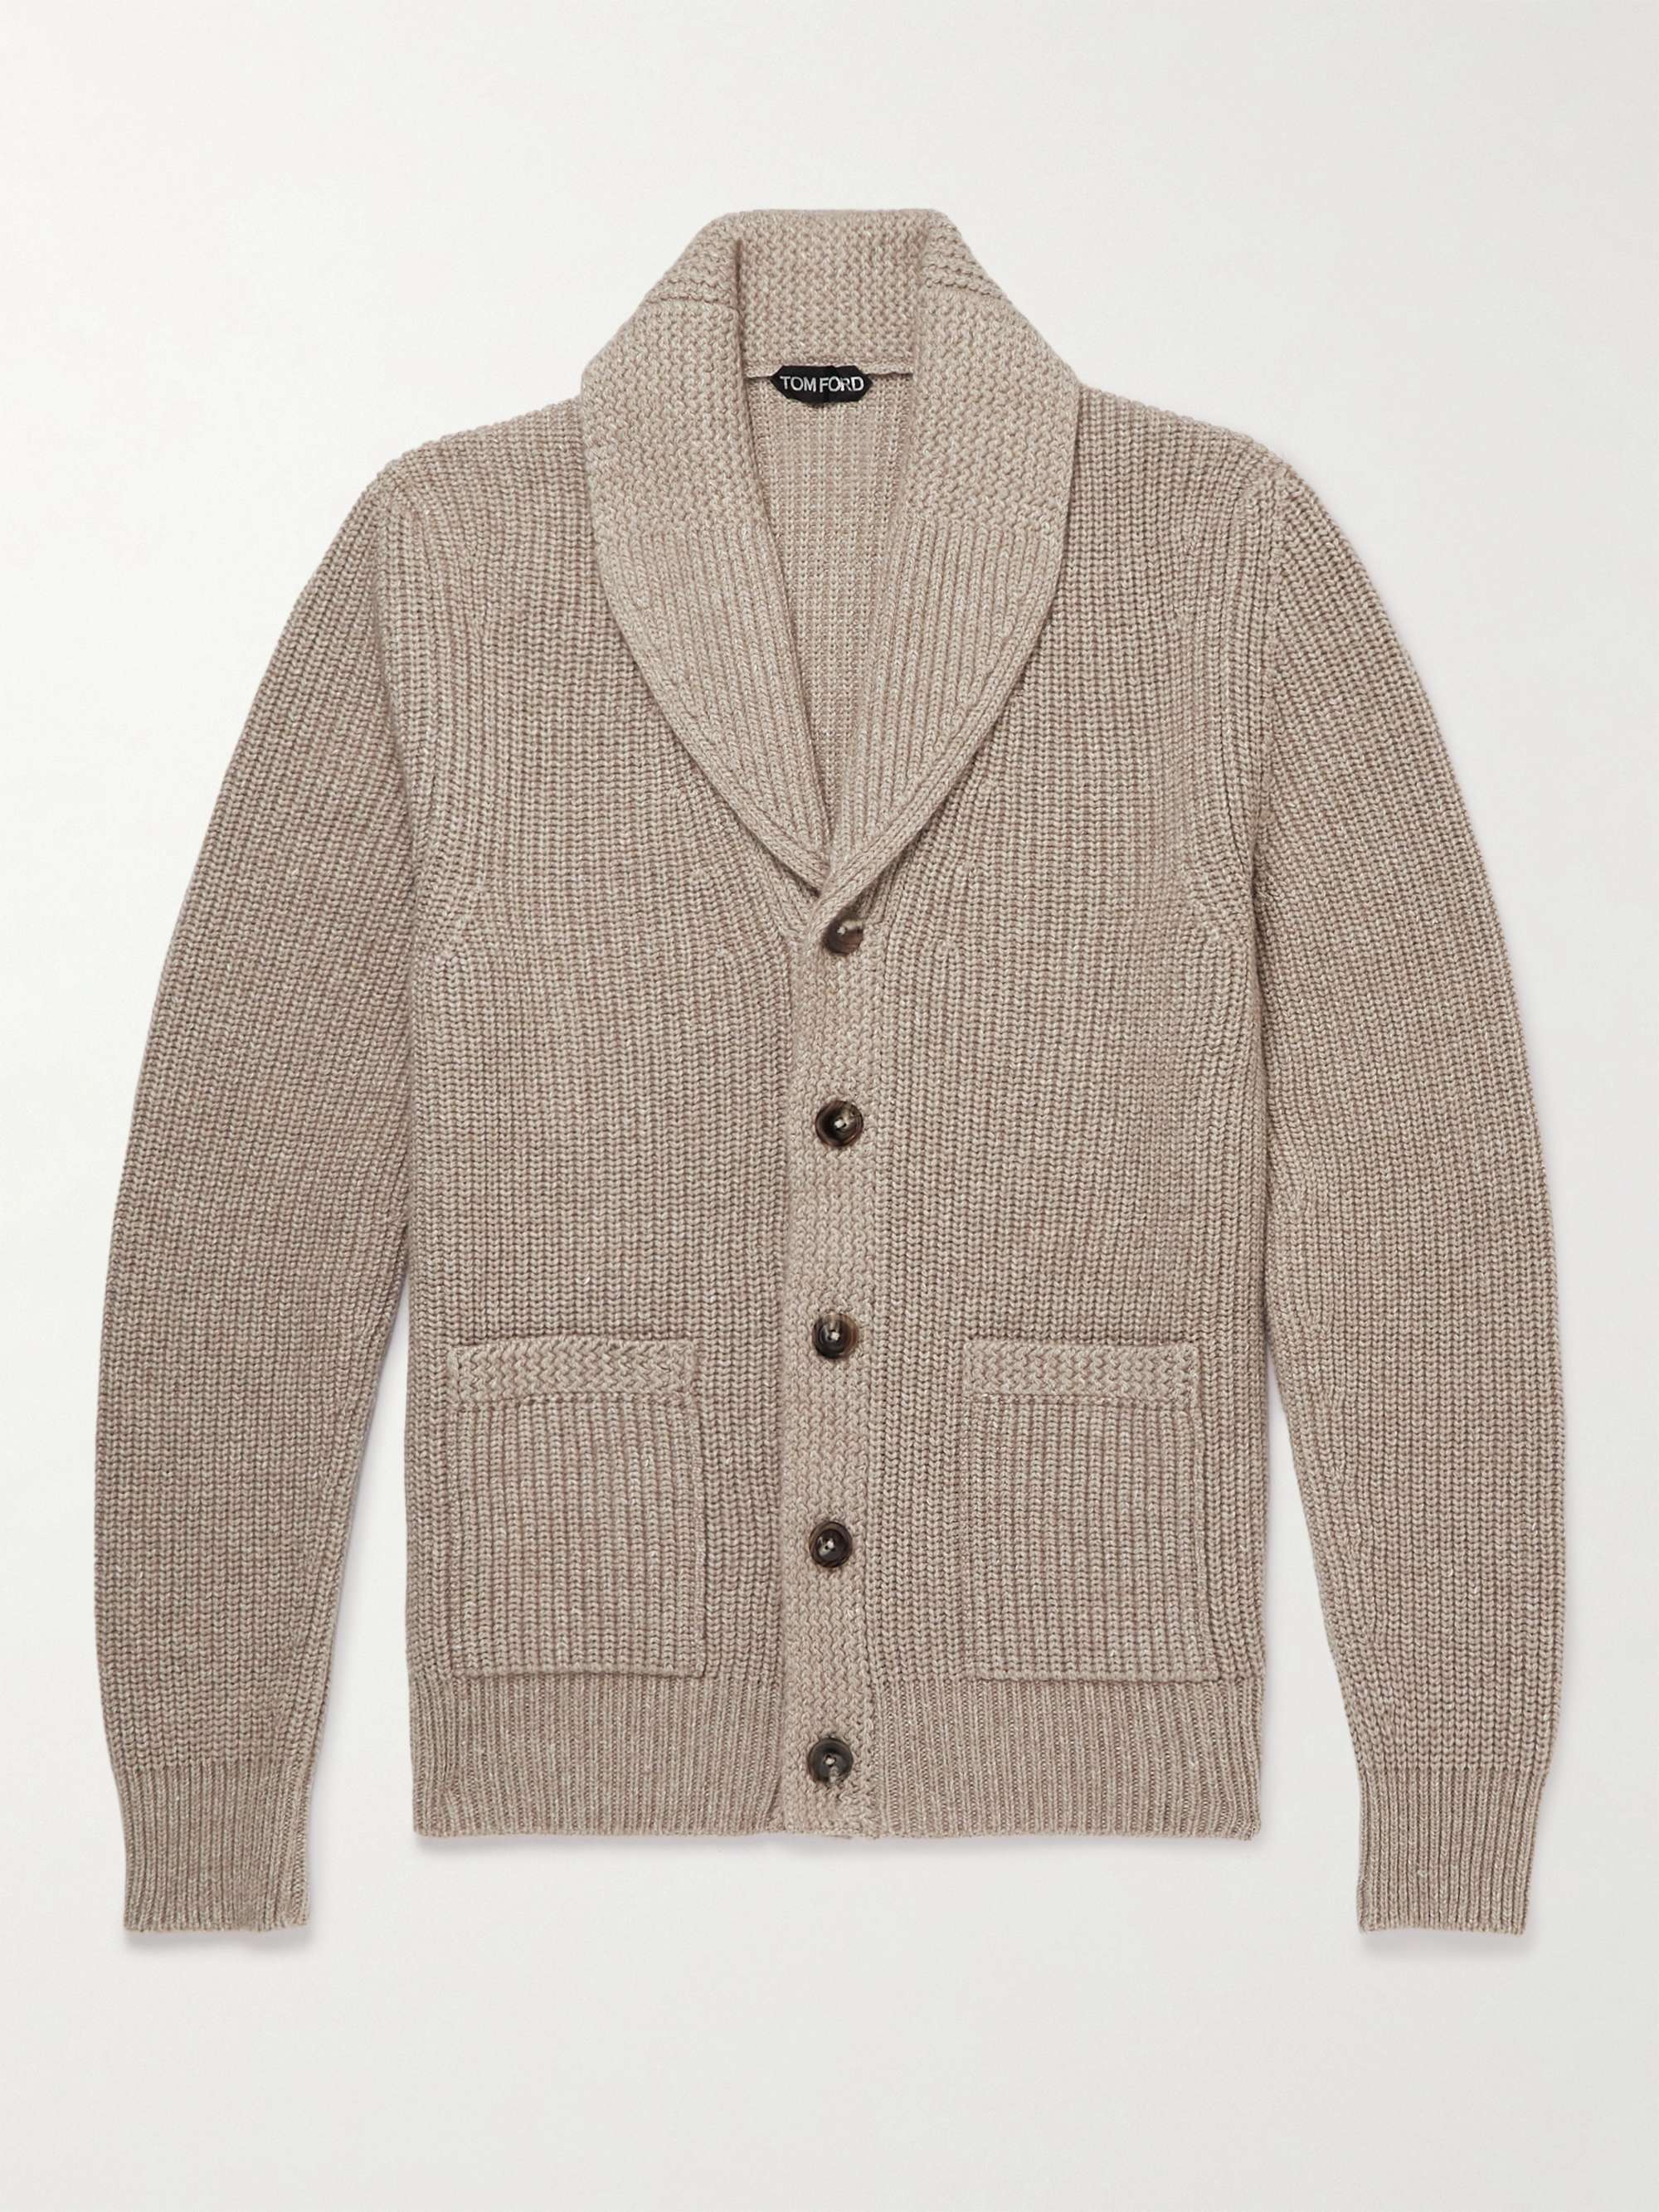 TOM FORD Shawl-Collar Ribbed-Knit Cashmere and Linen-Blend Cardigan | MR  PORTER